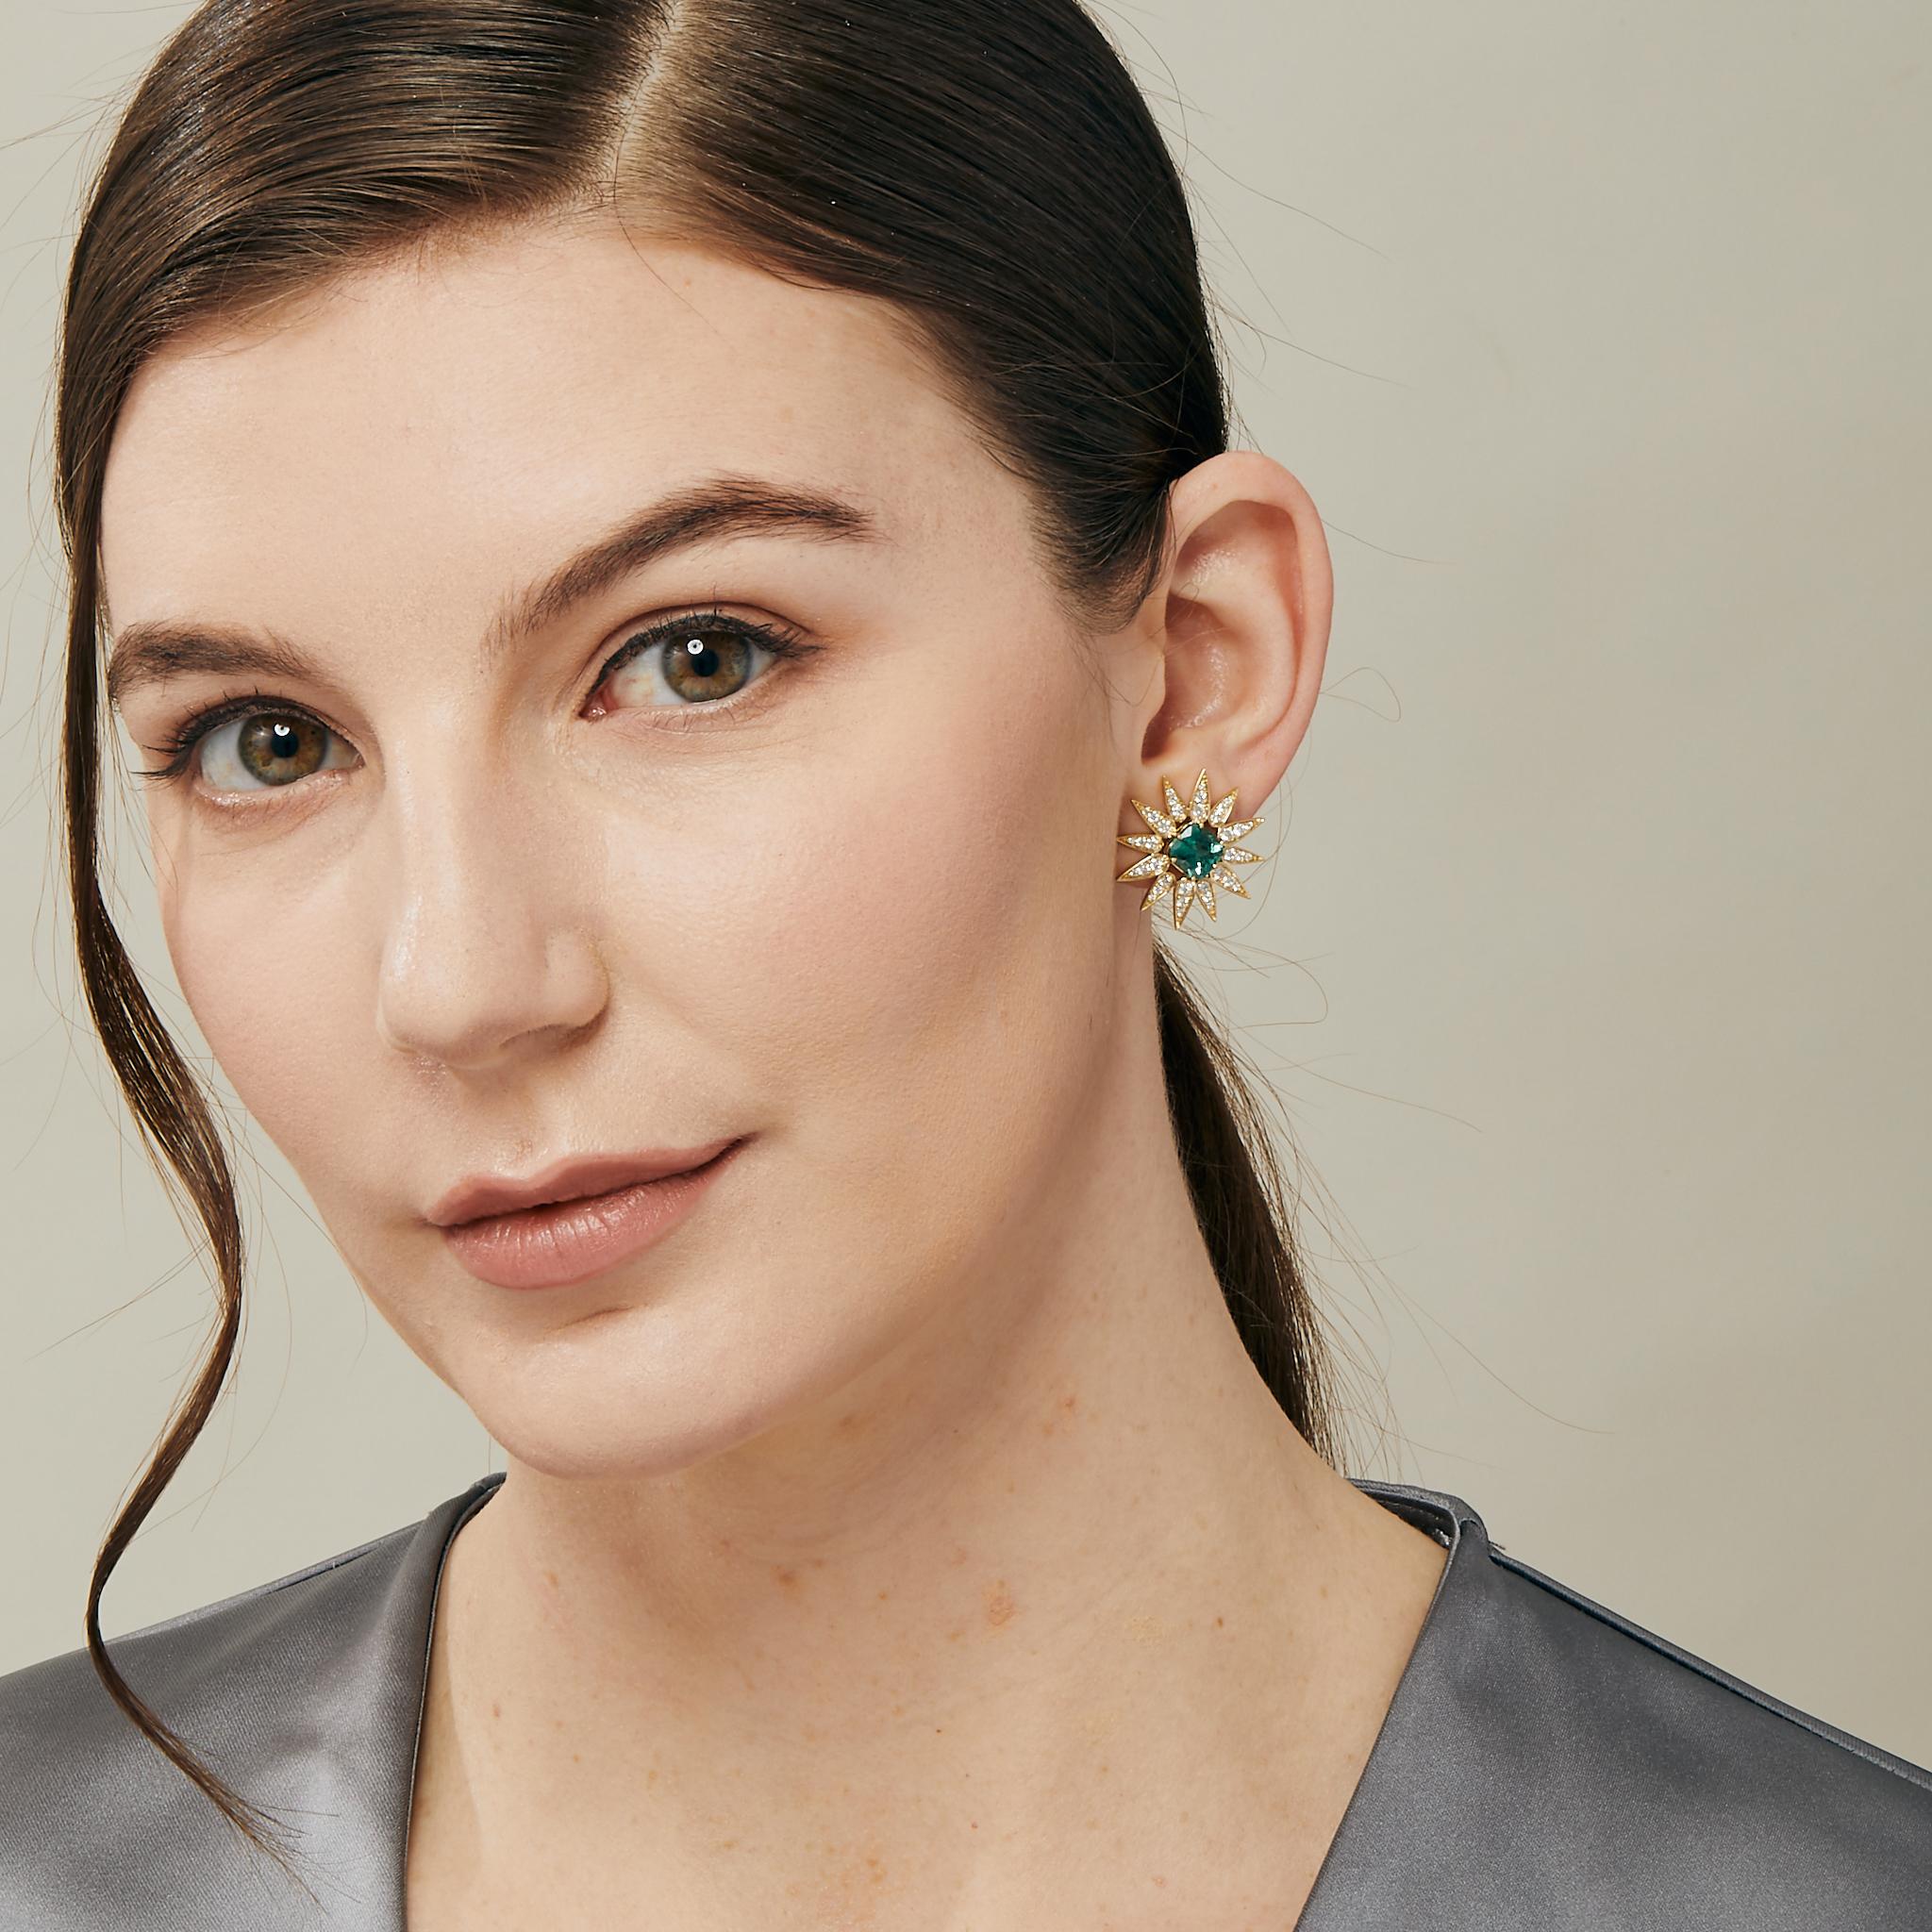 Created in 18 karat yellow gold
Green tourmaline 3.30 carats approx.
Diamonds 1.0 carat approx.
Omega clip-backs & posts
Limited Edition

Showcase your elegance and sophistication with our exclusive, limited edition Cosmic Gemstone Dangle Earrings.